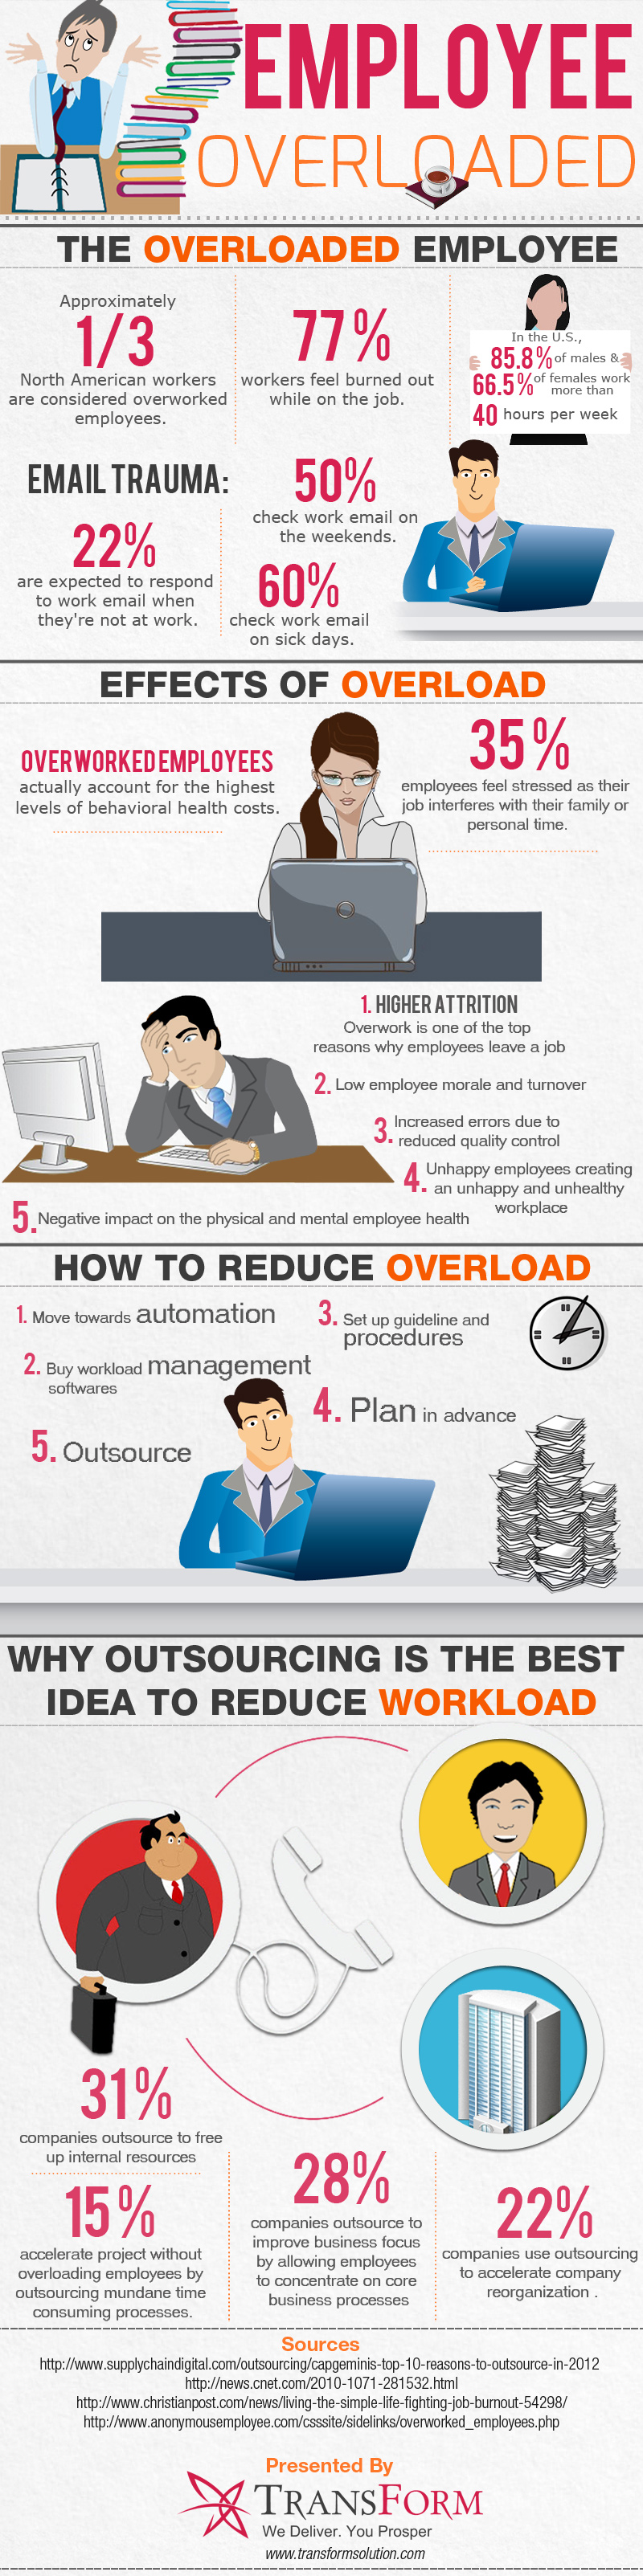 Employee-Overloaded-Infographic-by-TransForm-Solution